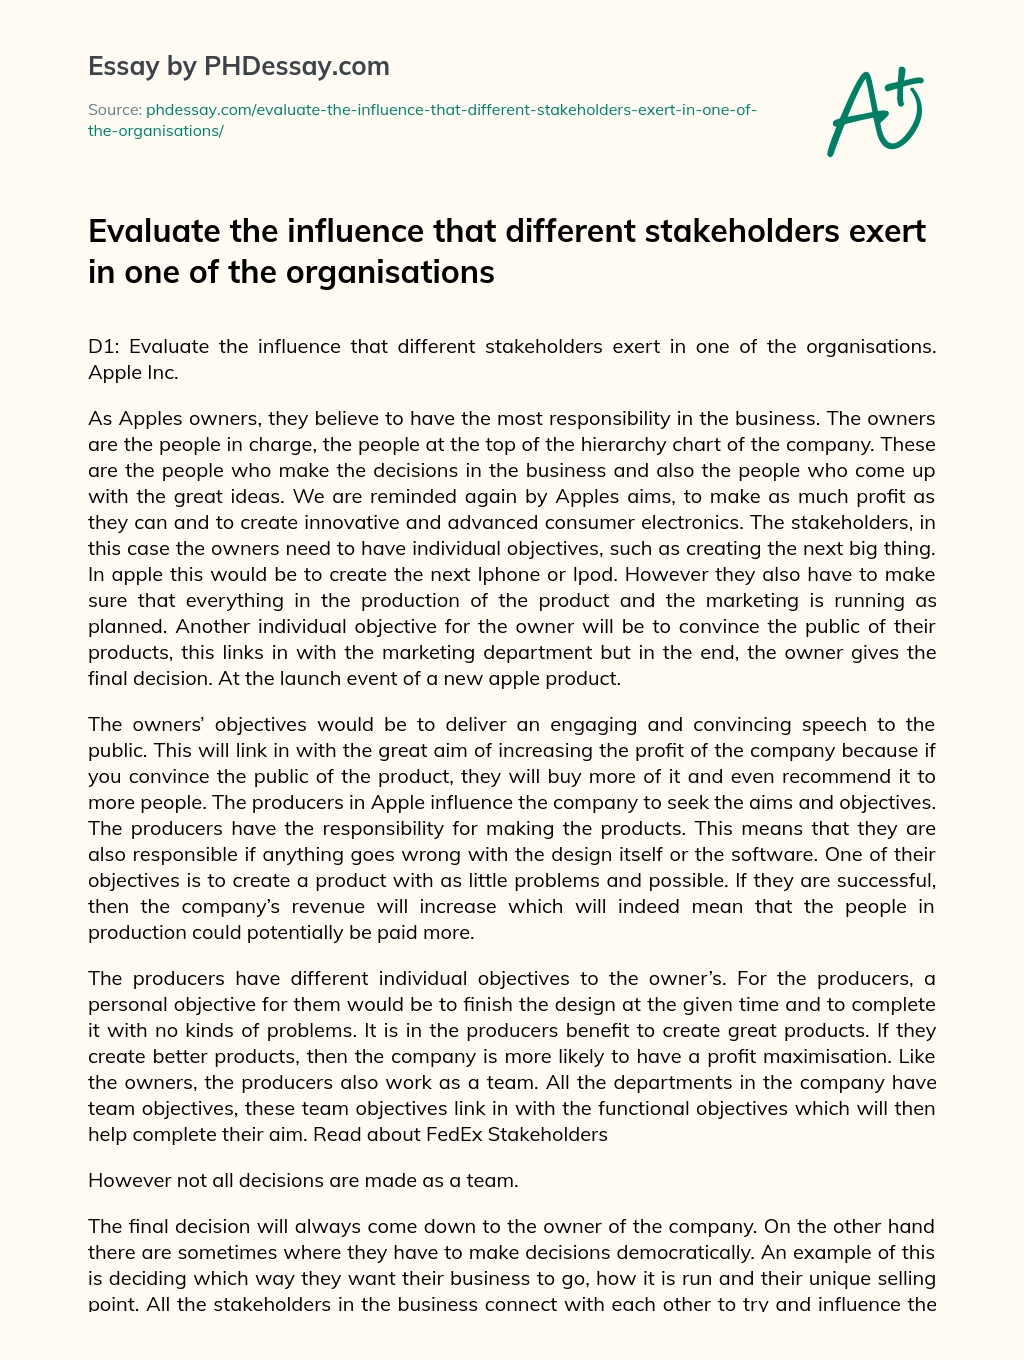 Evaluate the influence that different stakeholders exert in one of the organisations essay